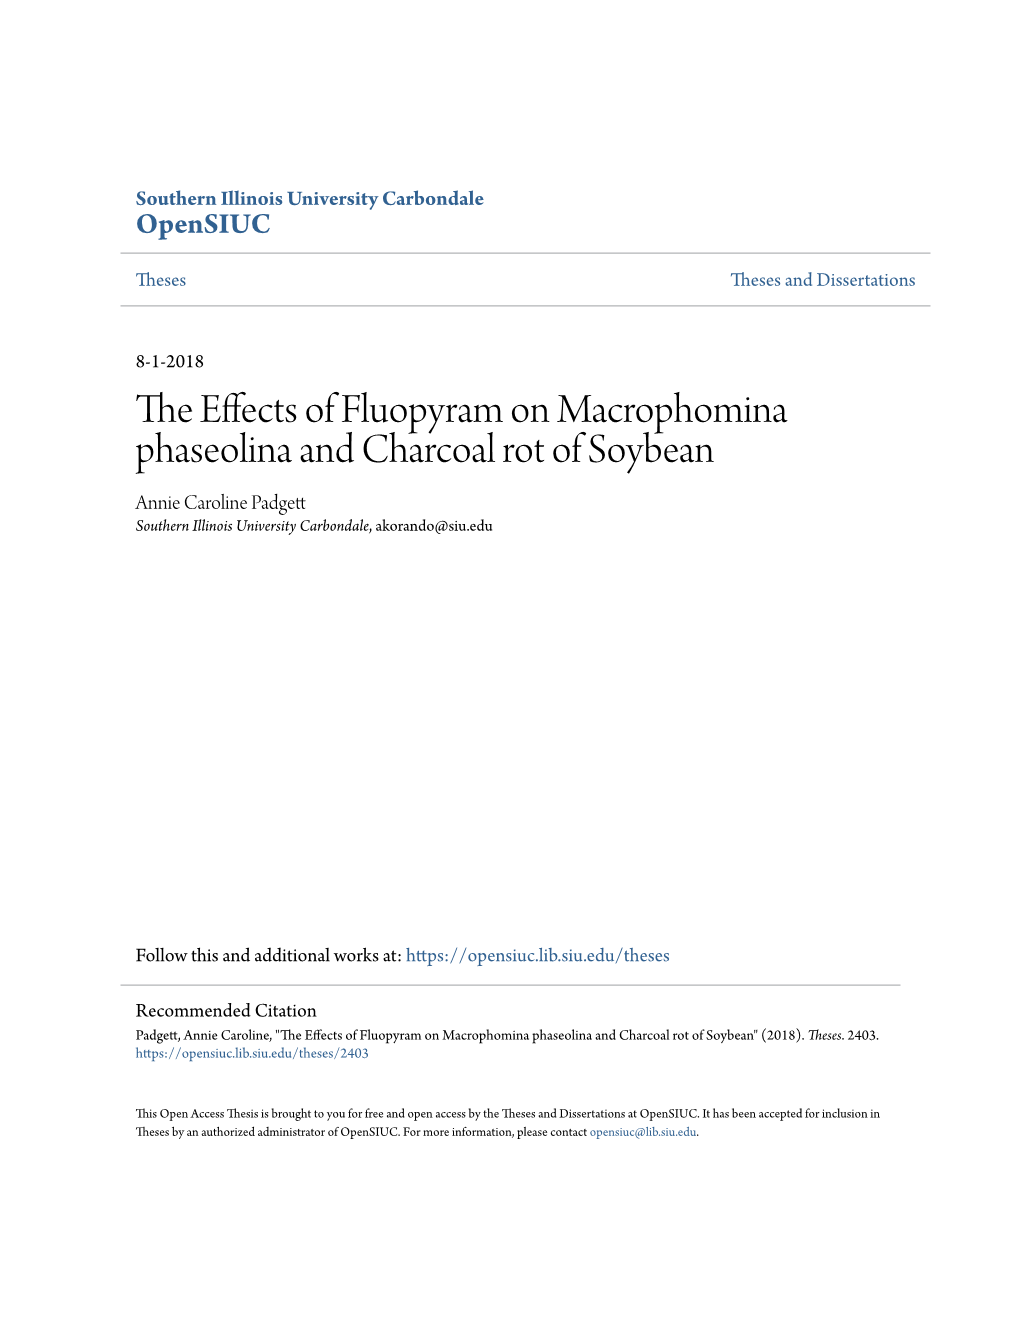 The Effects of Fluopyram on Macrophomina Phaseolina and Charcoal Rot of Soybean" (2018)